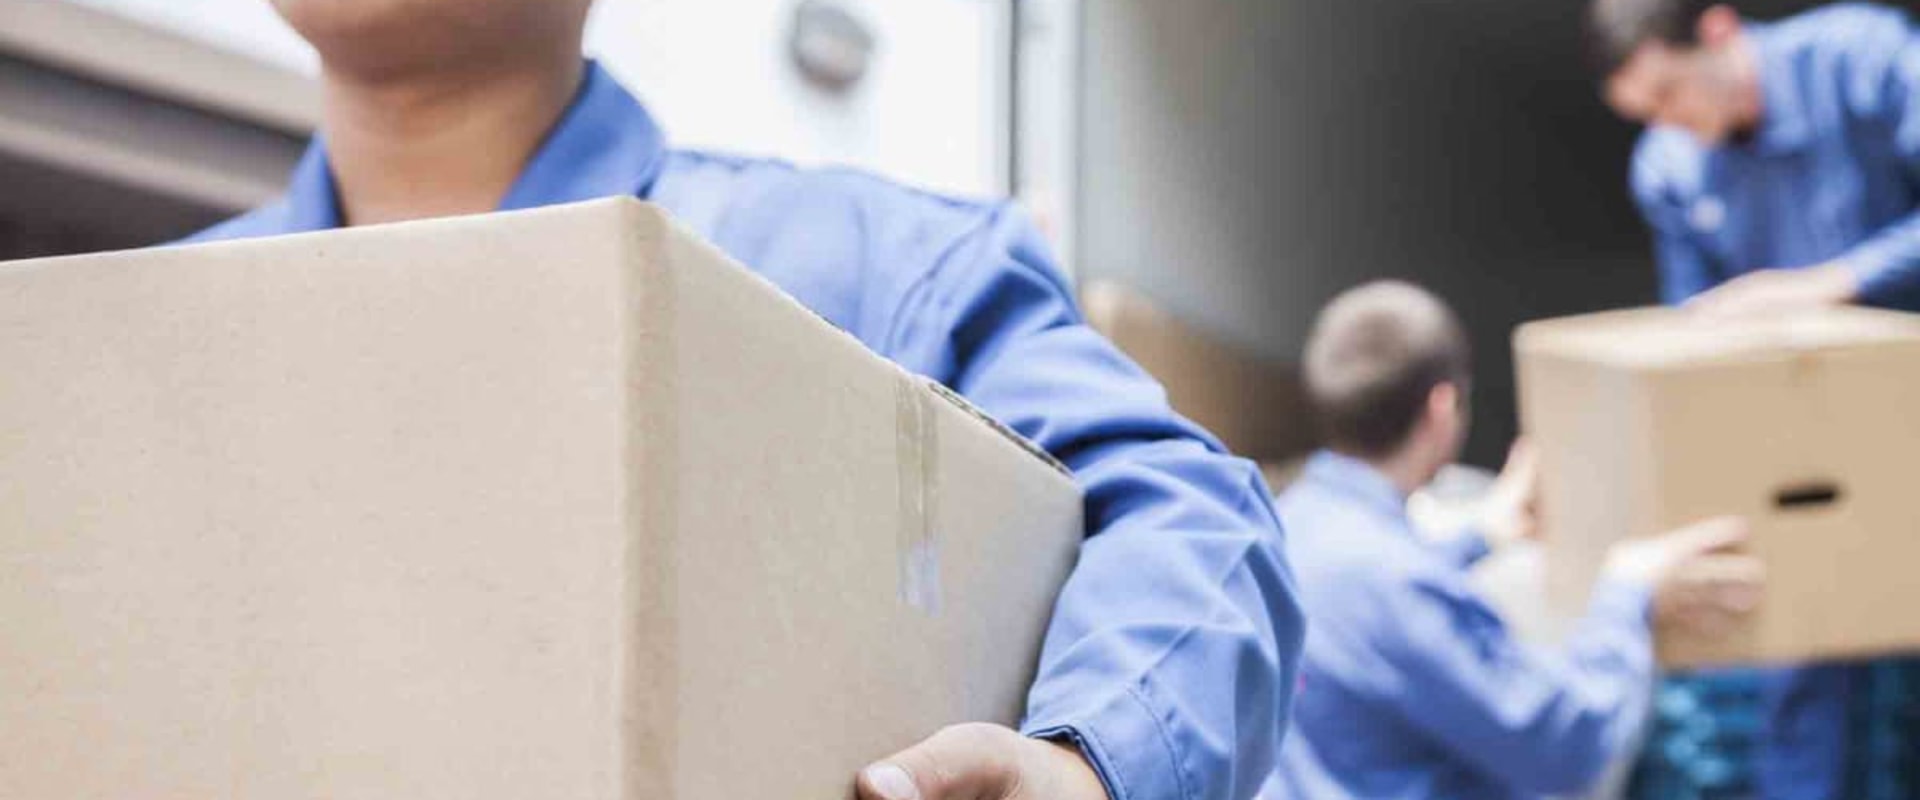 Expert Tips for Finding the Best Movers Near Me in Houston, TX